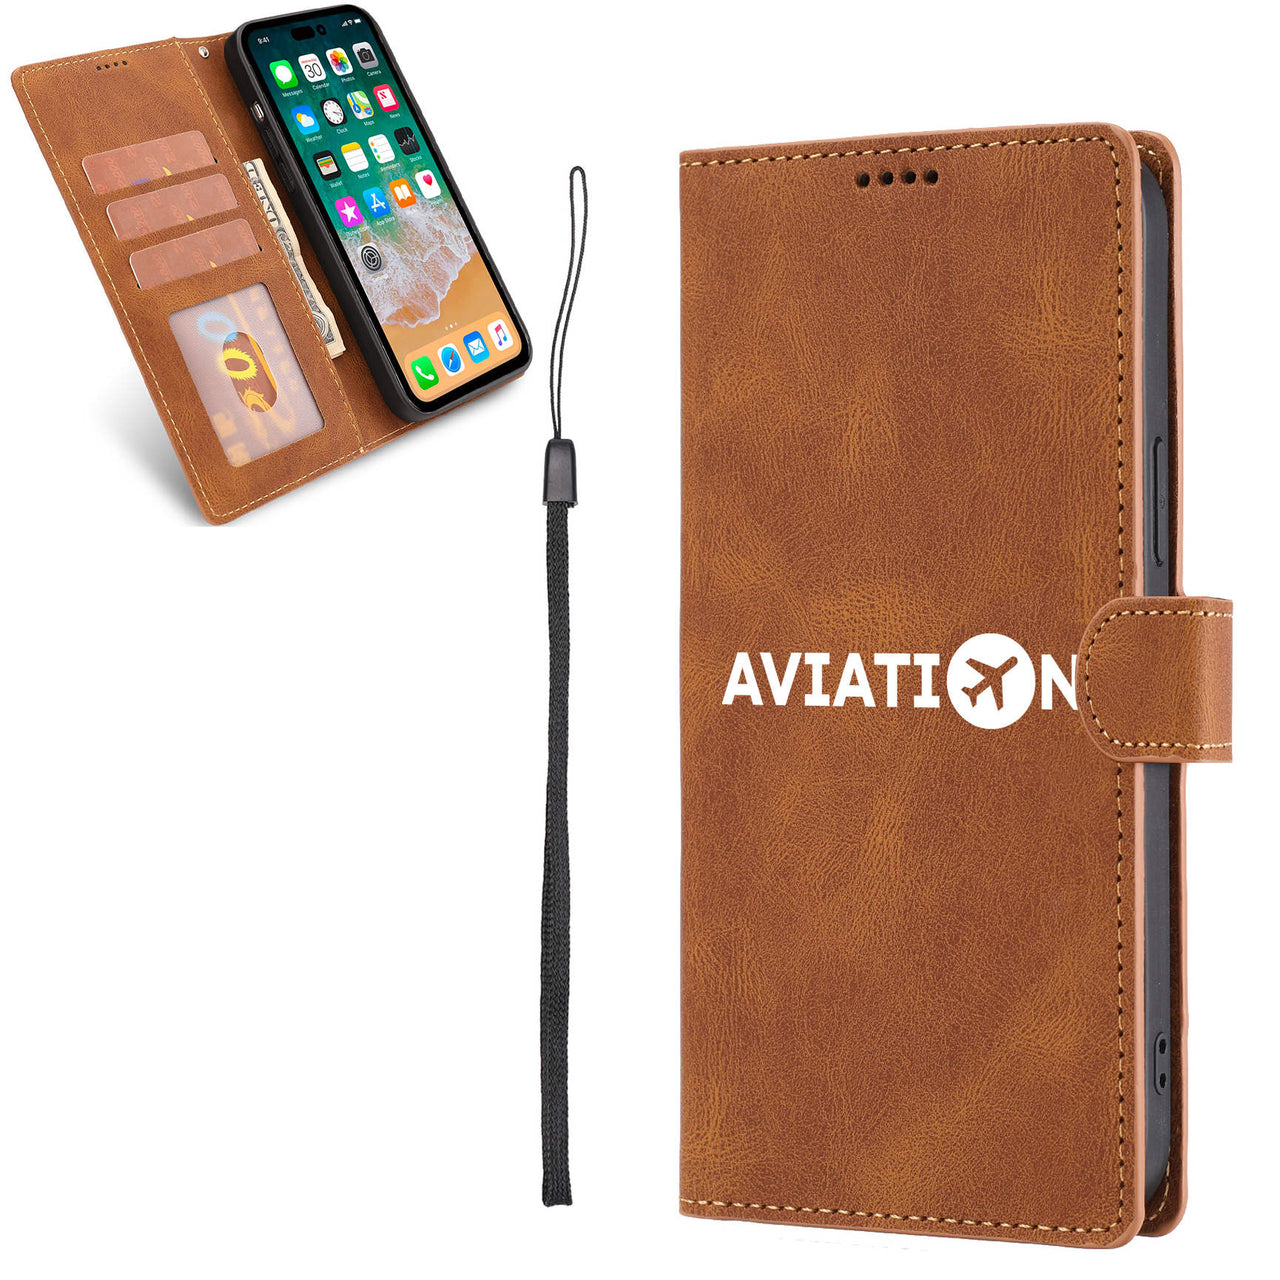 Aviation Designed Leather iPhone Cases